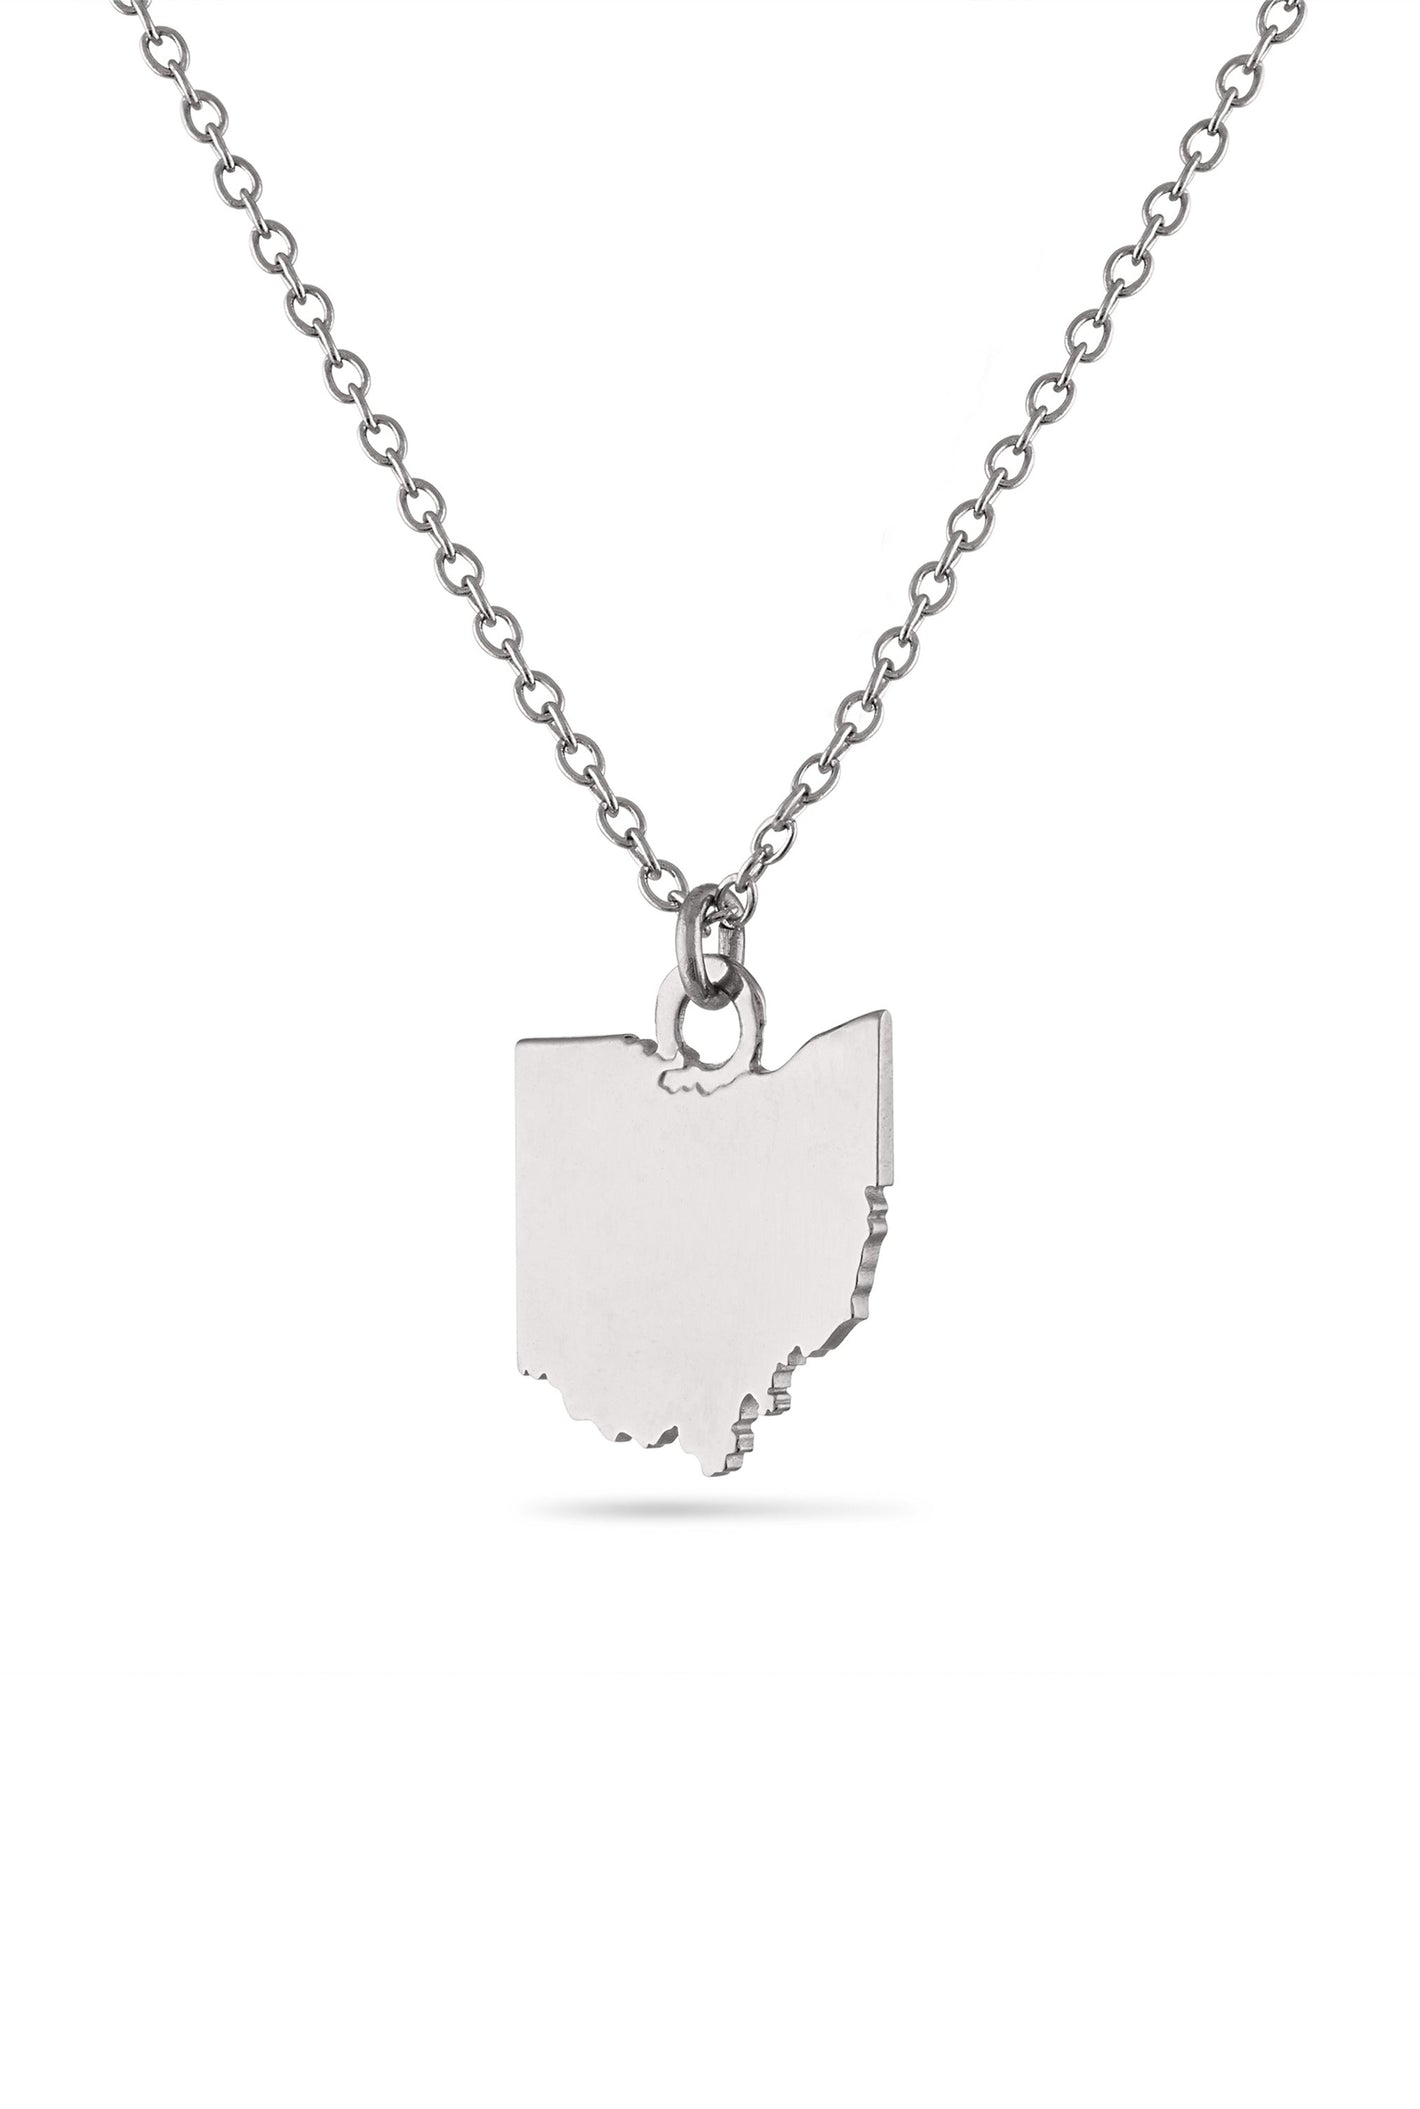 5420 - State of Ohio Necklace